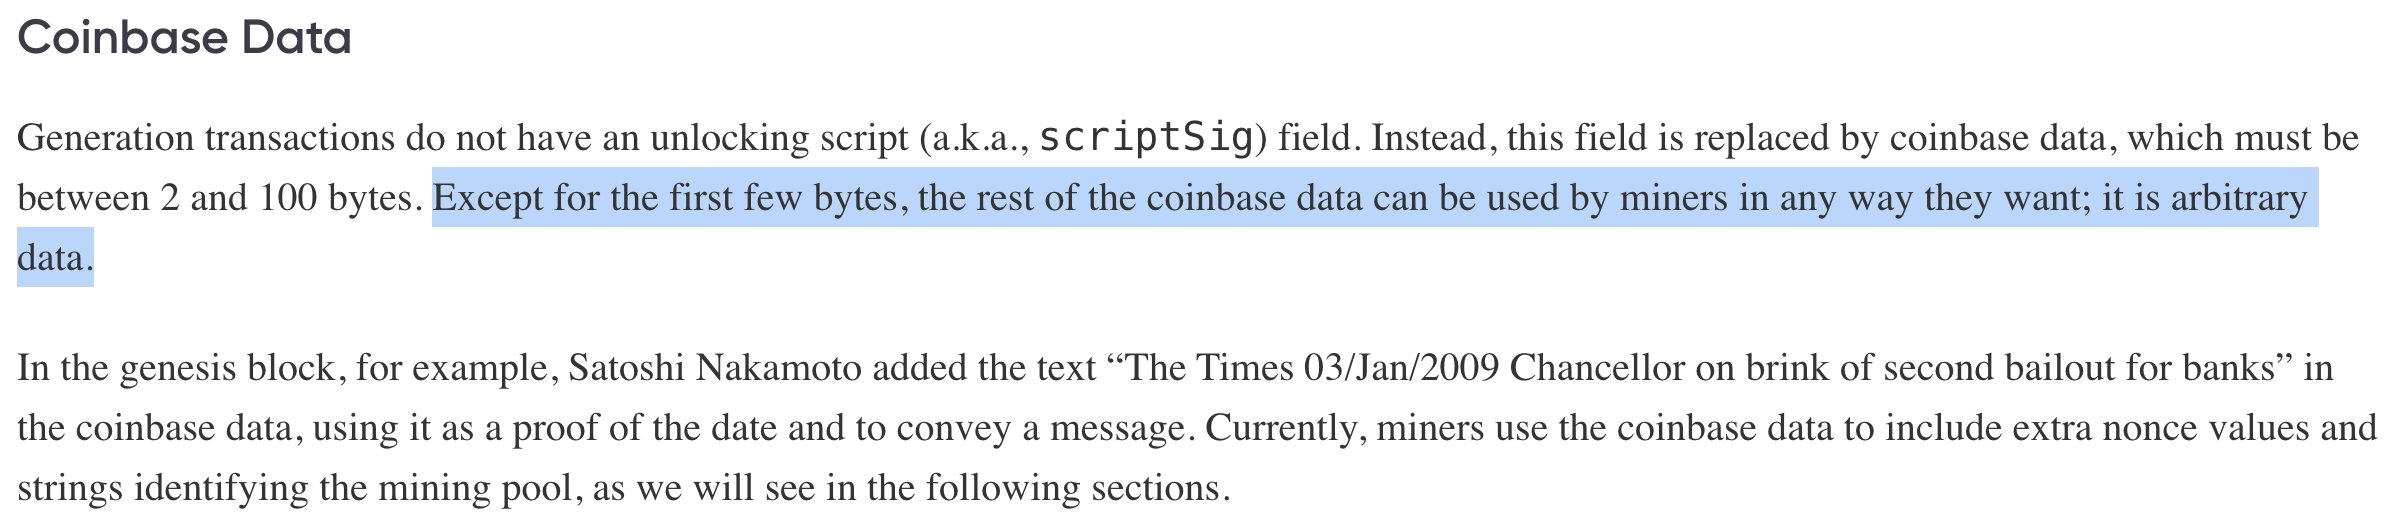 Mechanism used to inscribe the Genesis block message by Satoshi